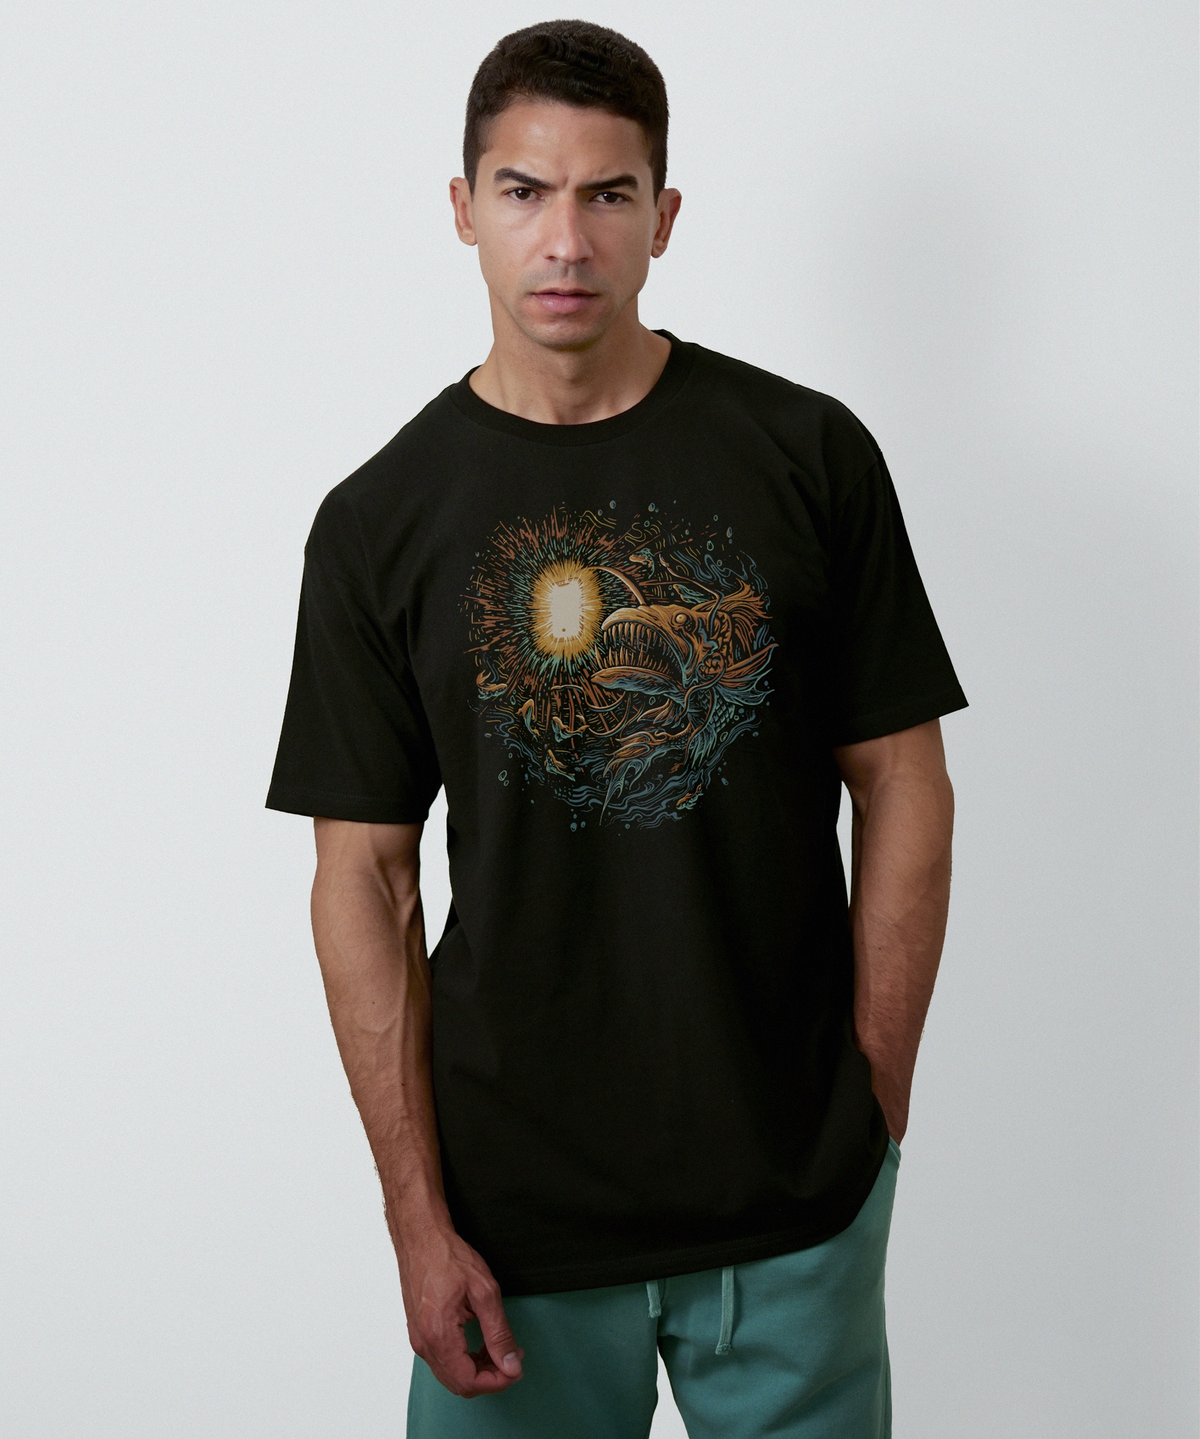 Angler Fish - Graphic Tee for Men